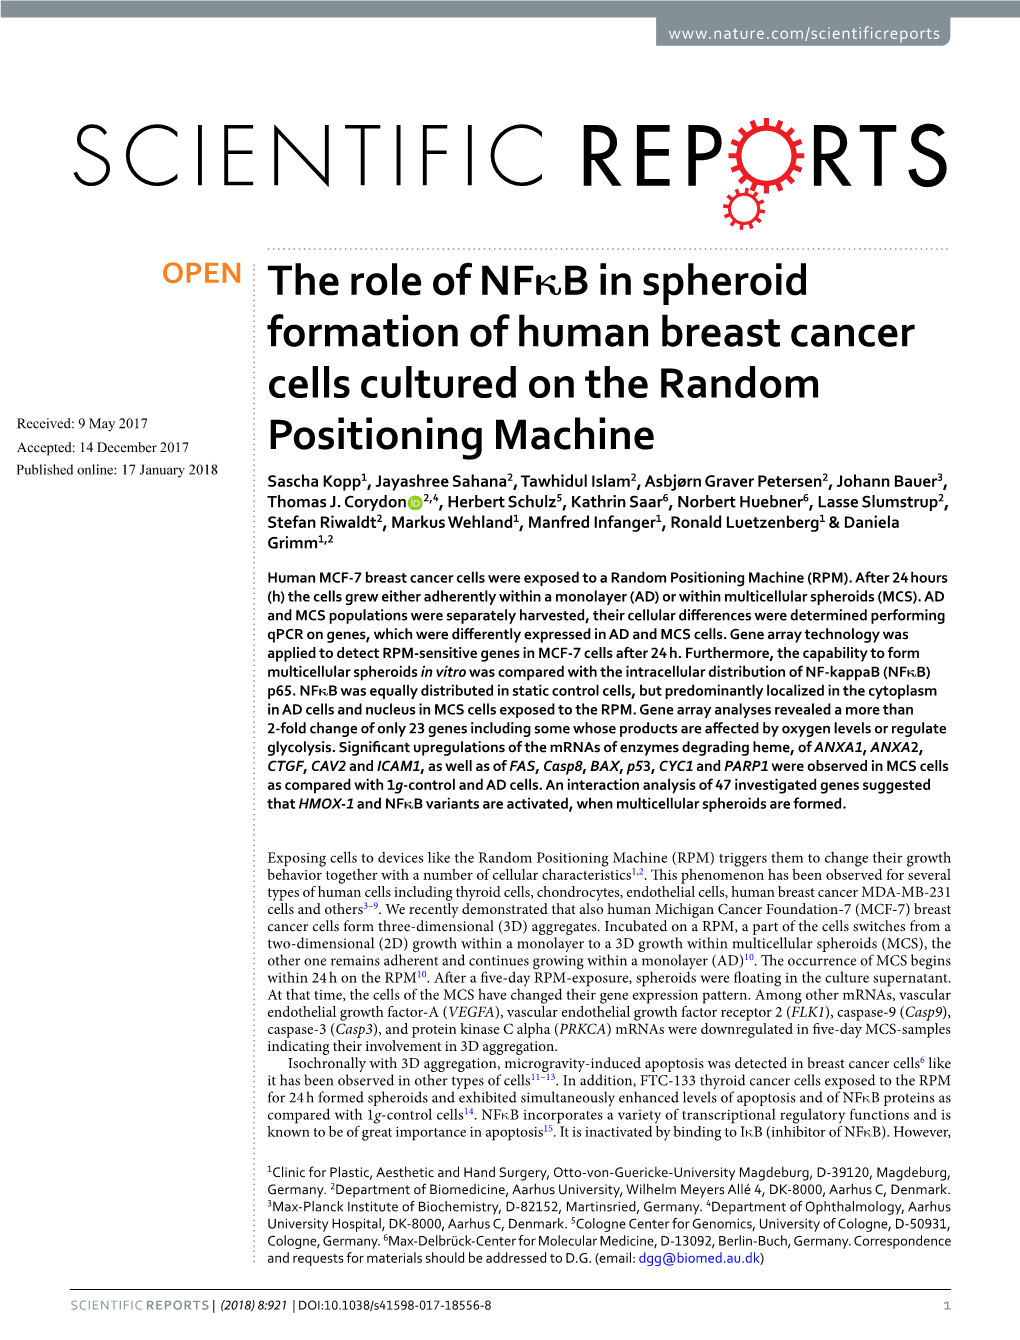 The Role of Nfκb in Spheroid Formation of Human Breast Cancer Cells